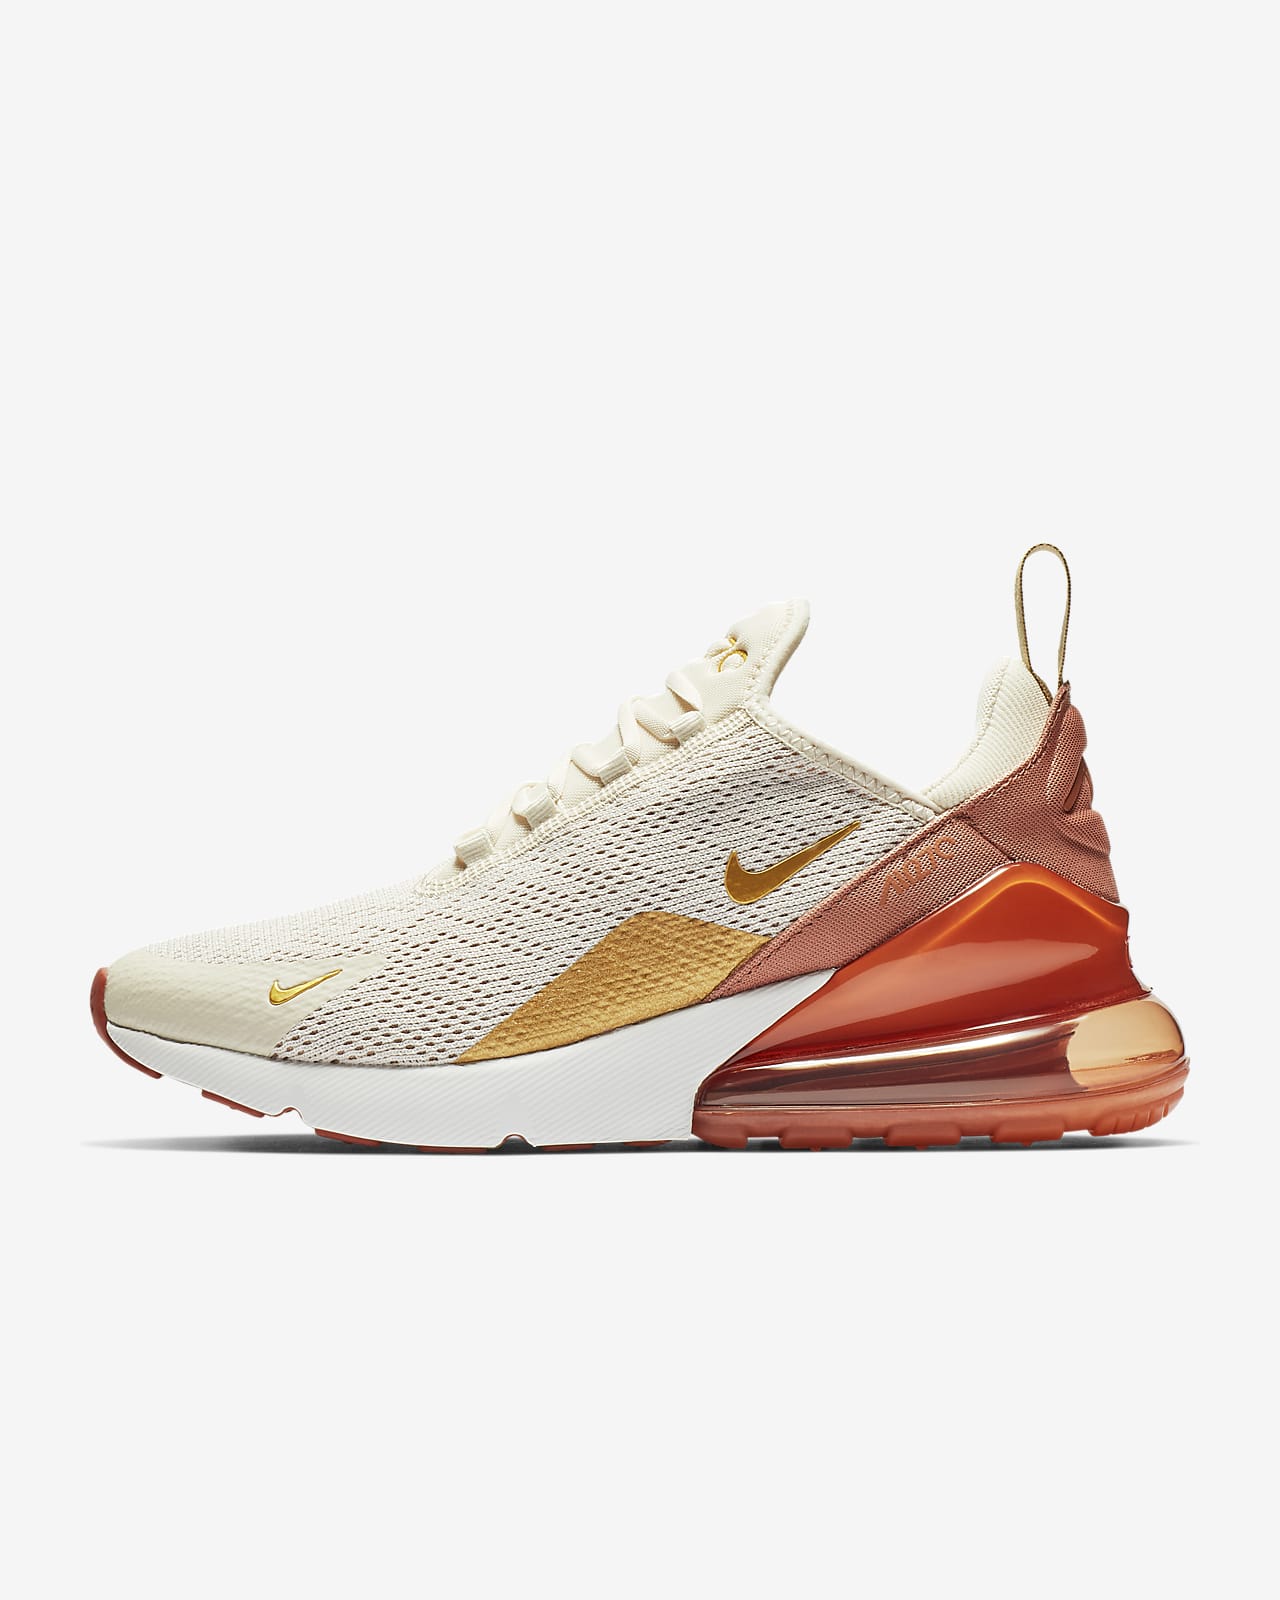 nike air max offers